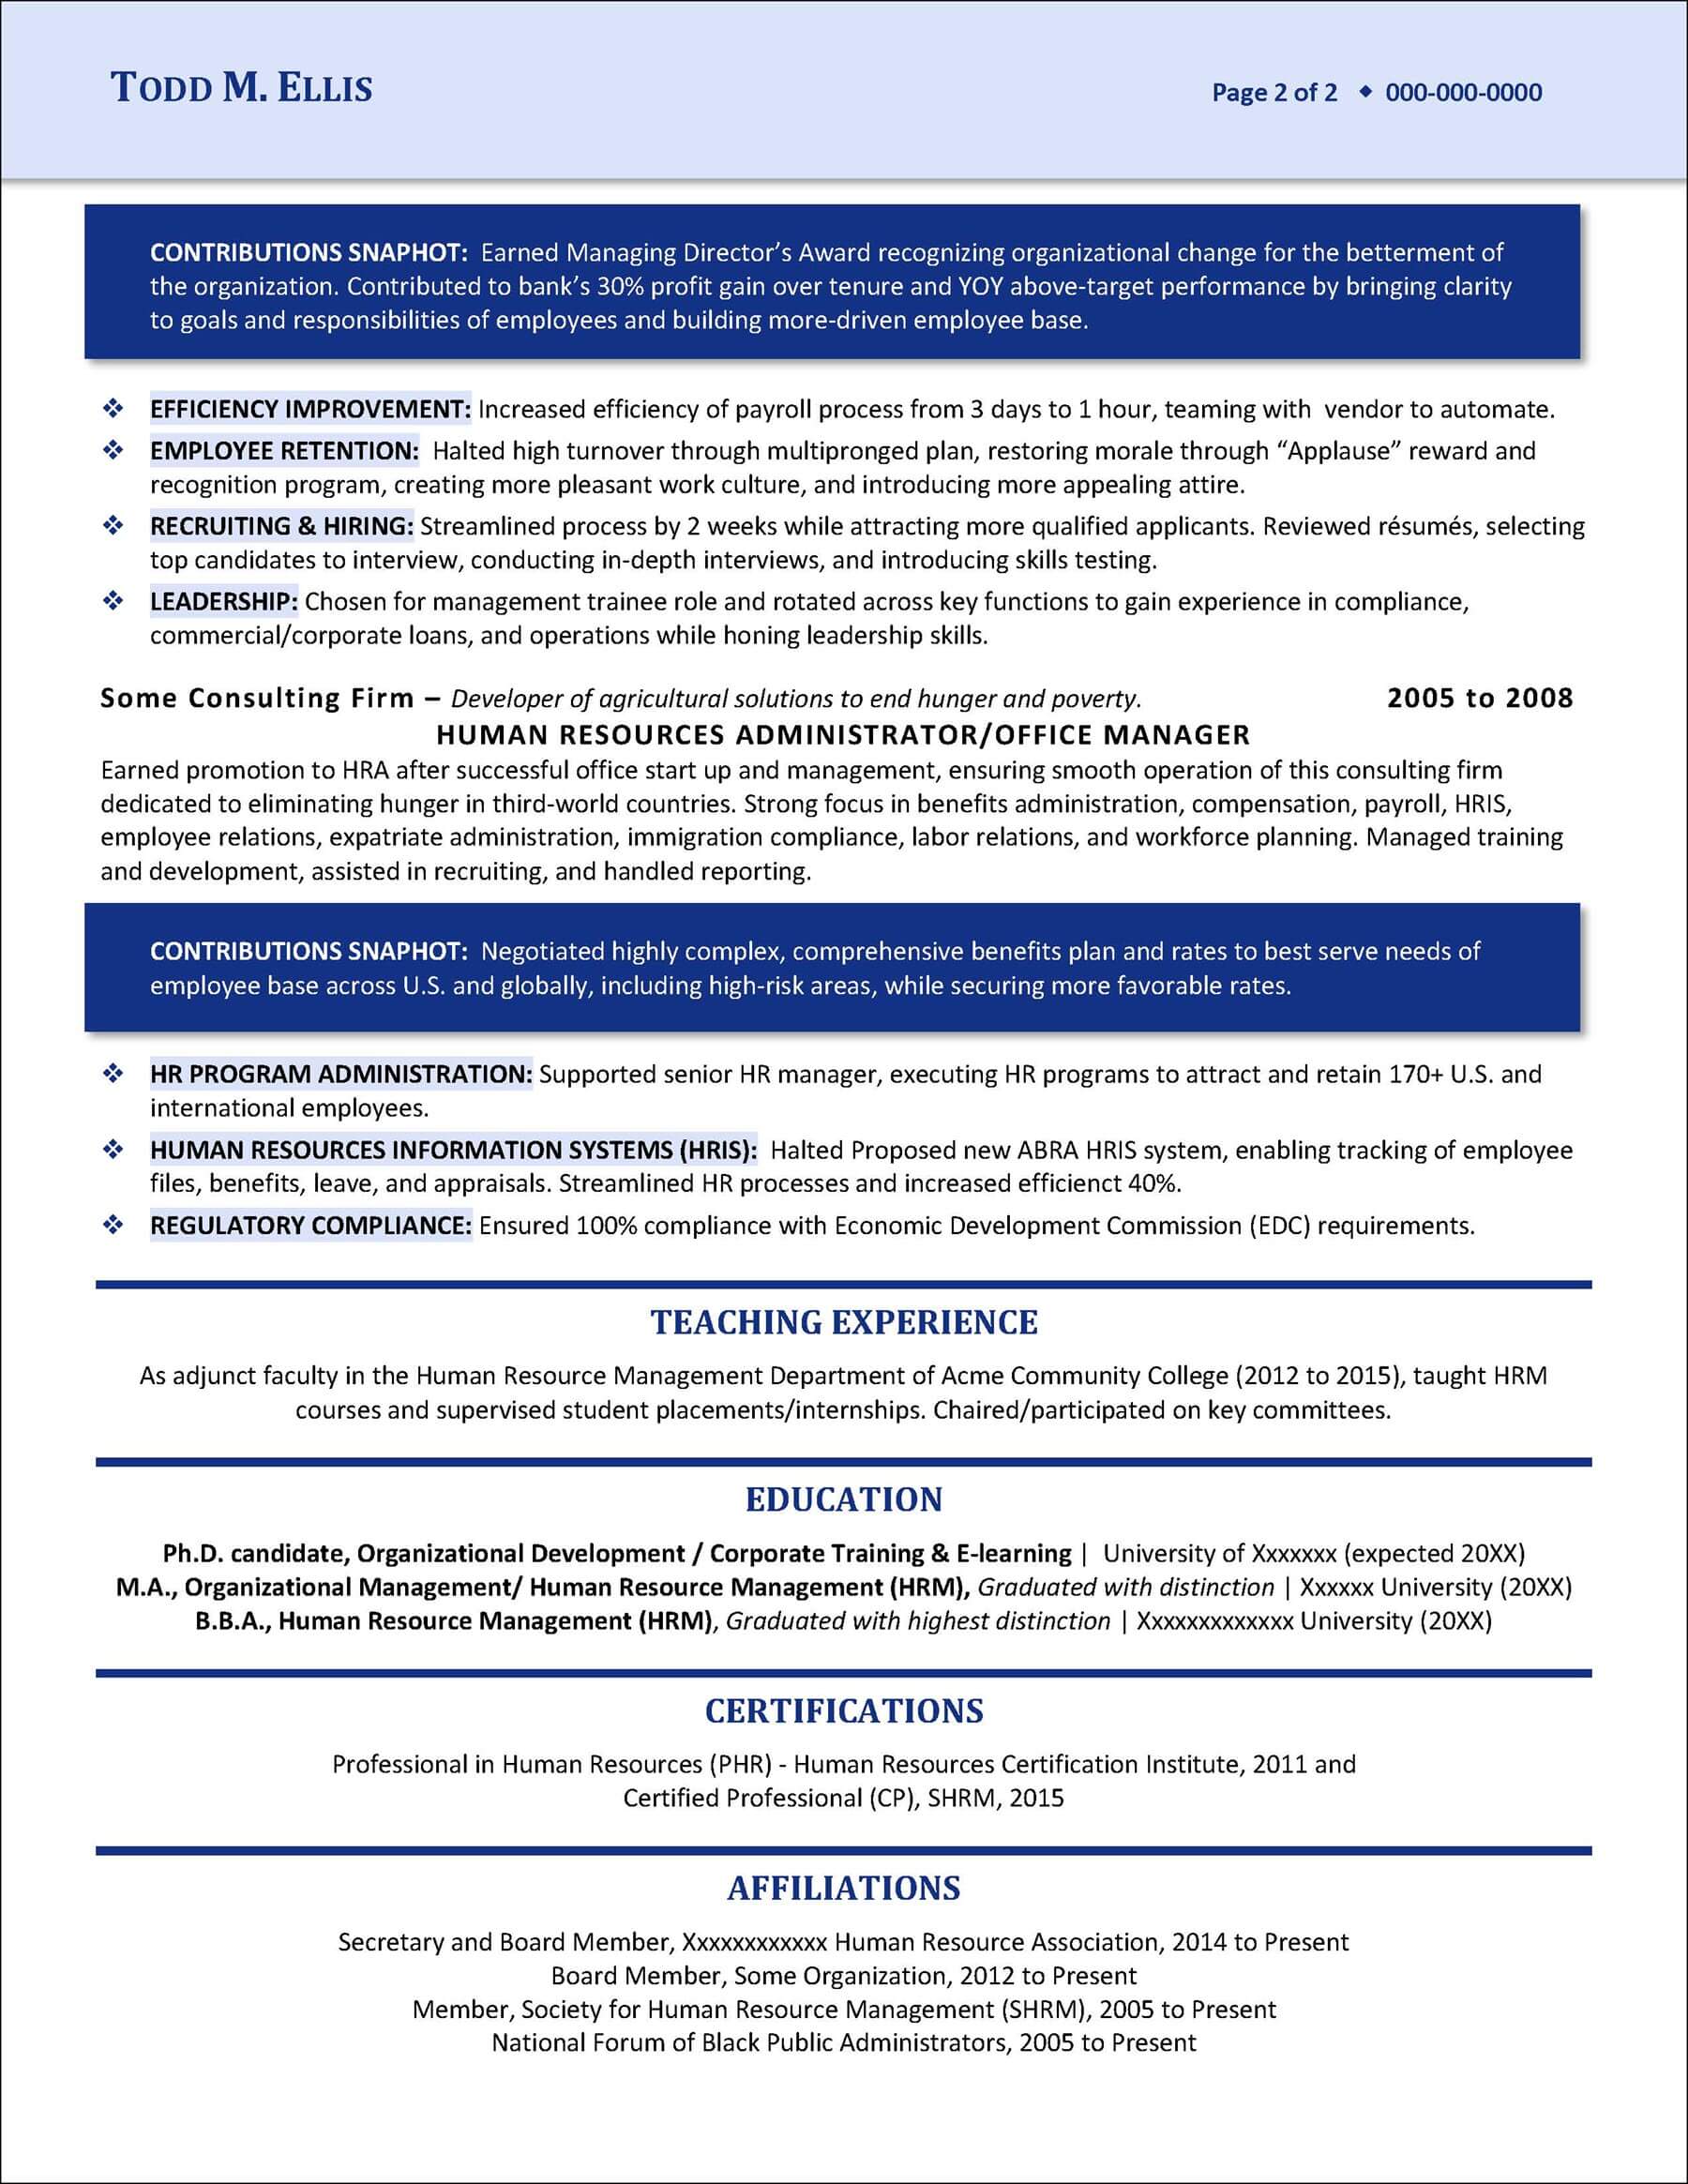 Human Resources Manager Resume Page 2